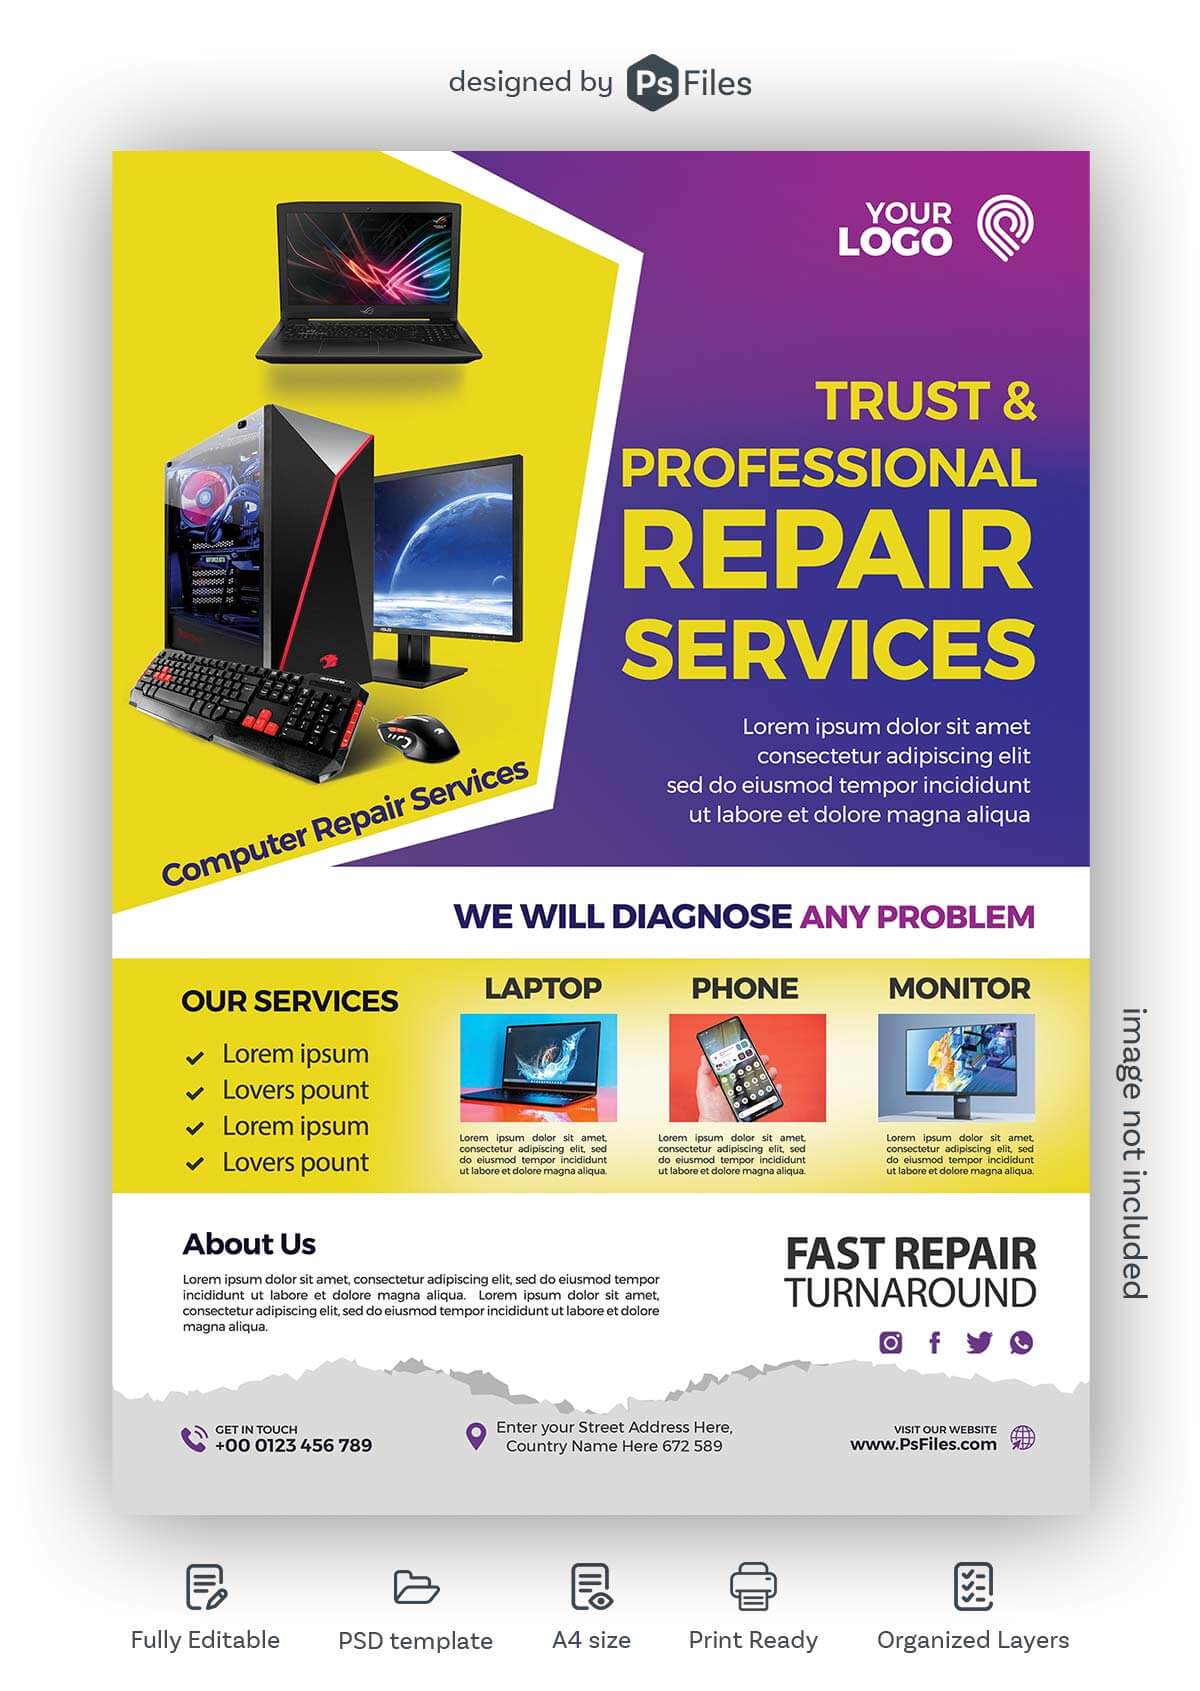 PsFiles Laptop Sales and Service, Repair Fix Free Flyer Design PSD Template